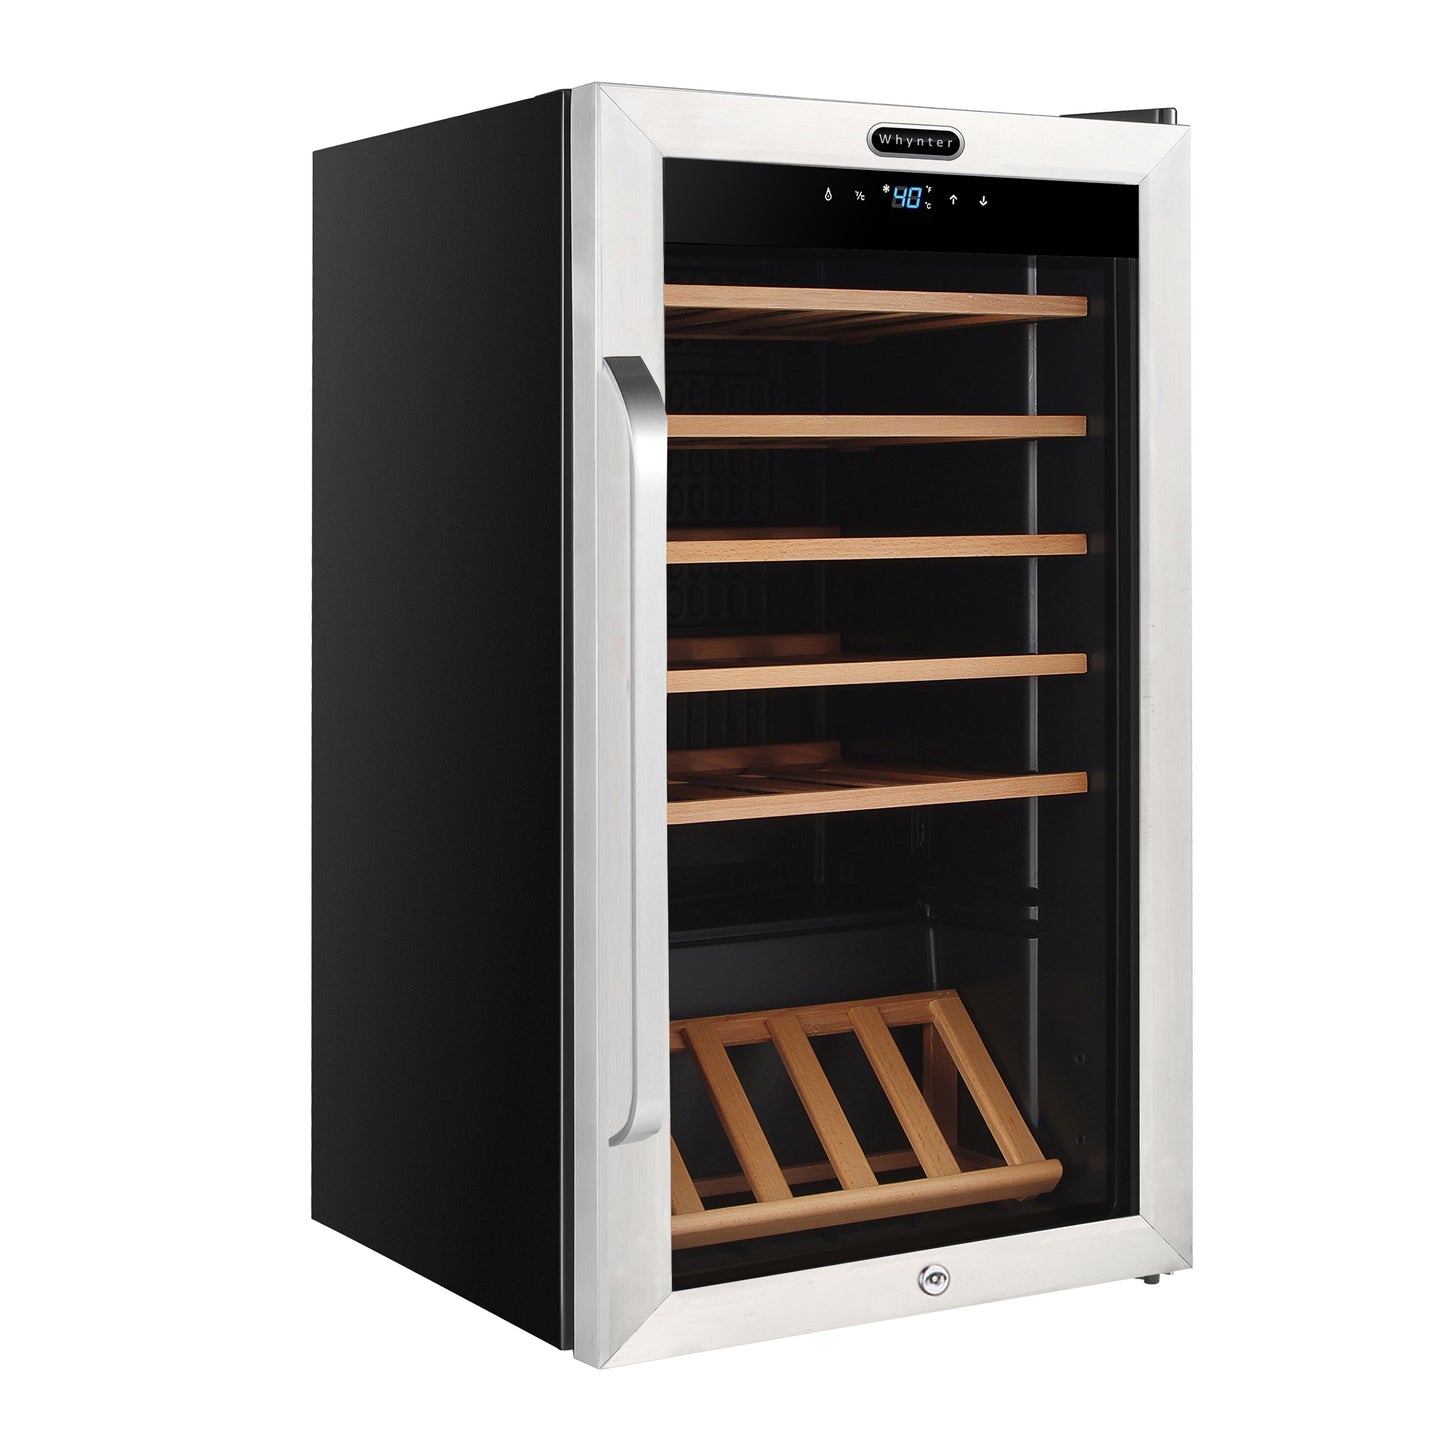 A black and silver wine cooler with wooden shelves, capable of holding up to 166 standard 750ml wine bottles.